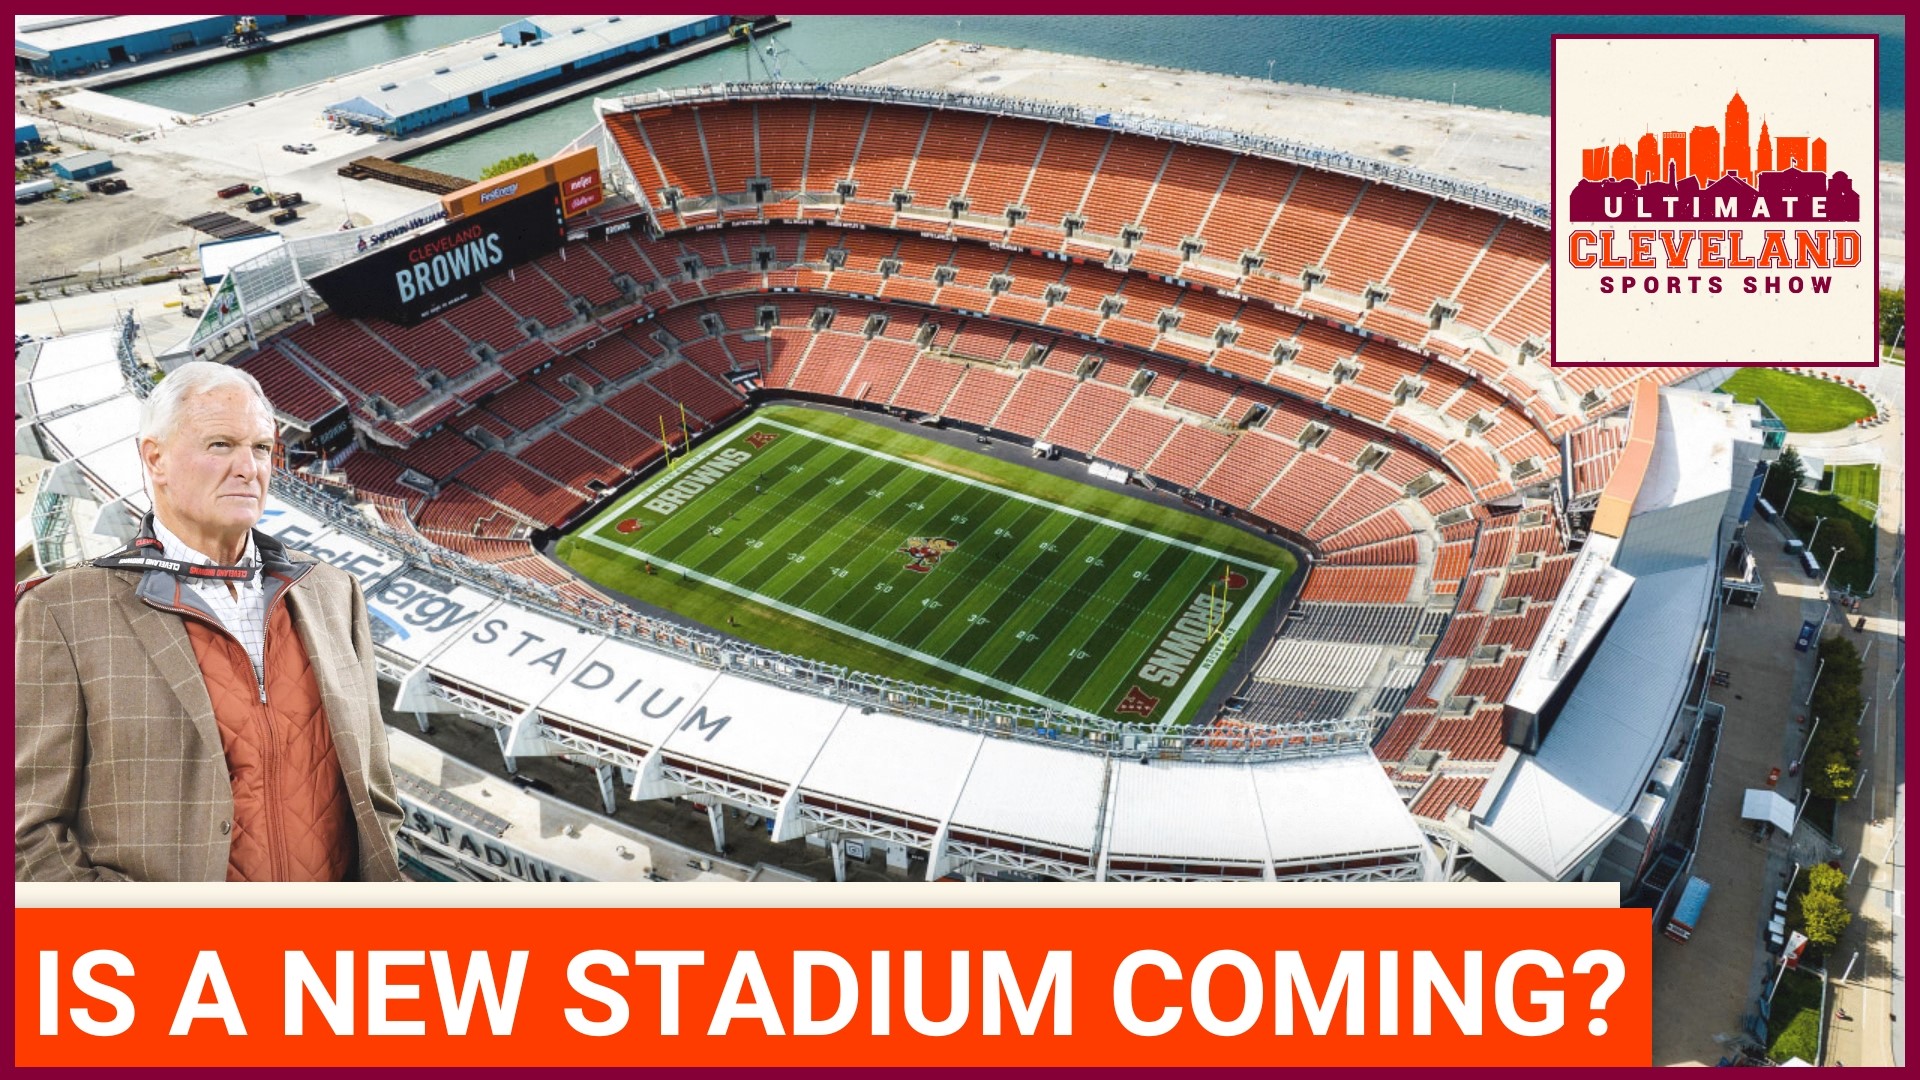 How soon before the Cleveland Browns is calling a new stadium home?